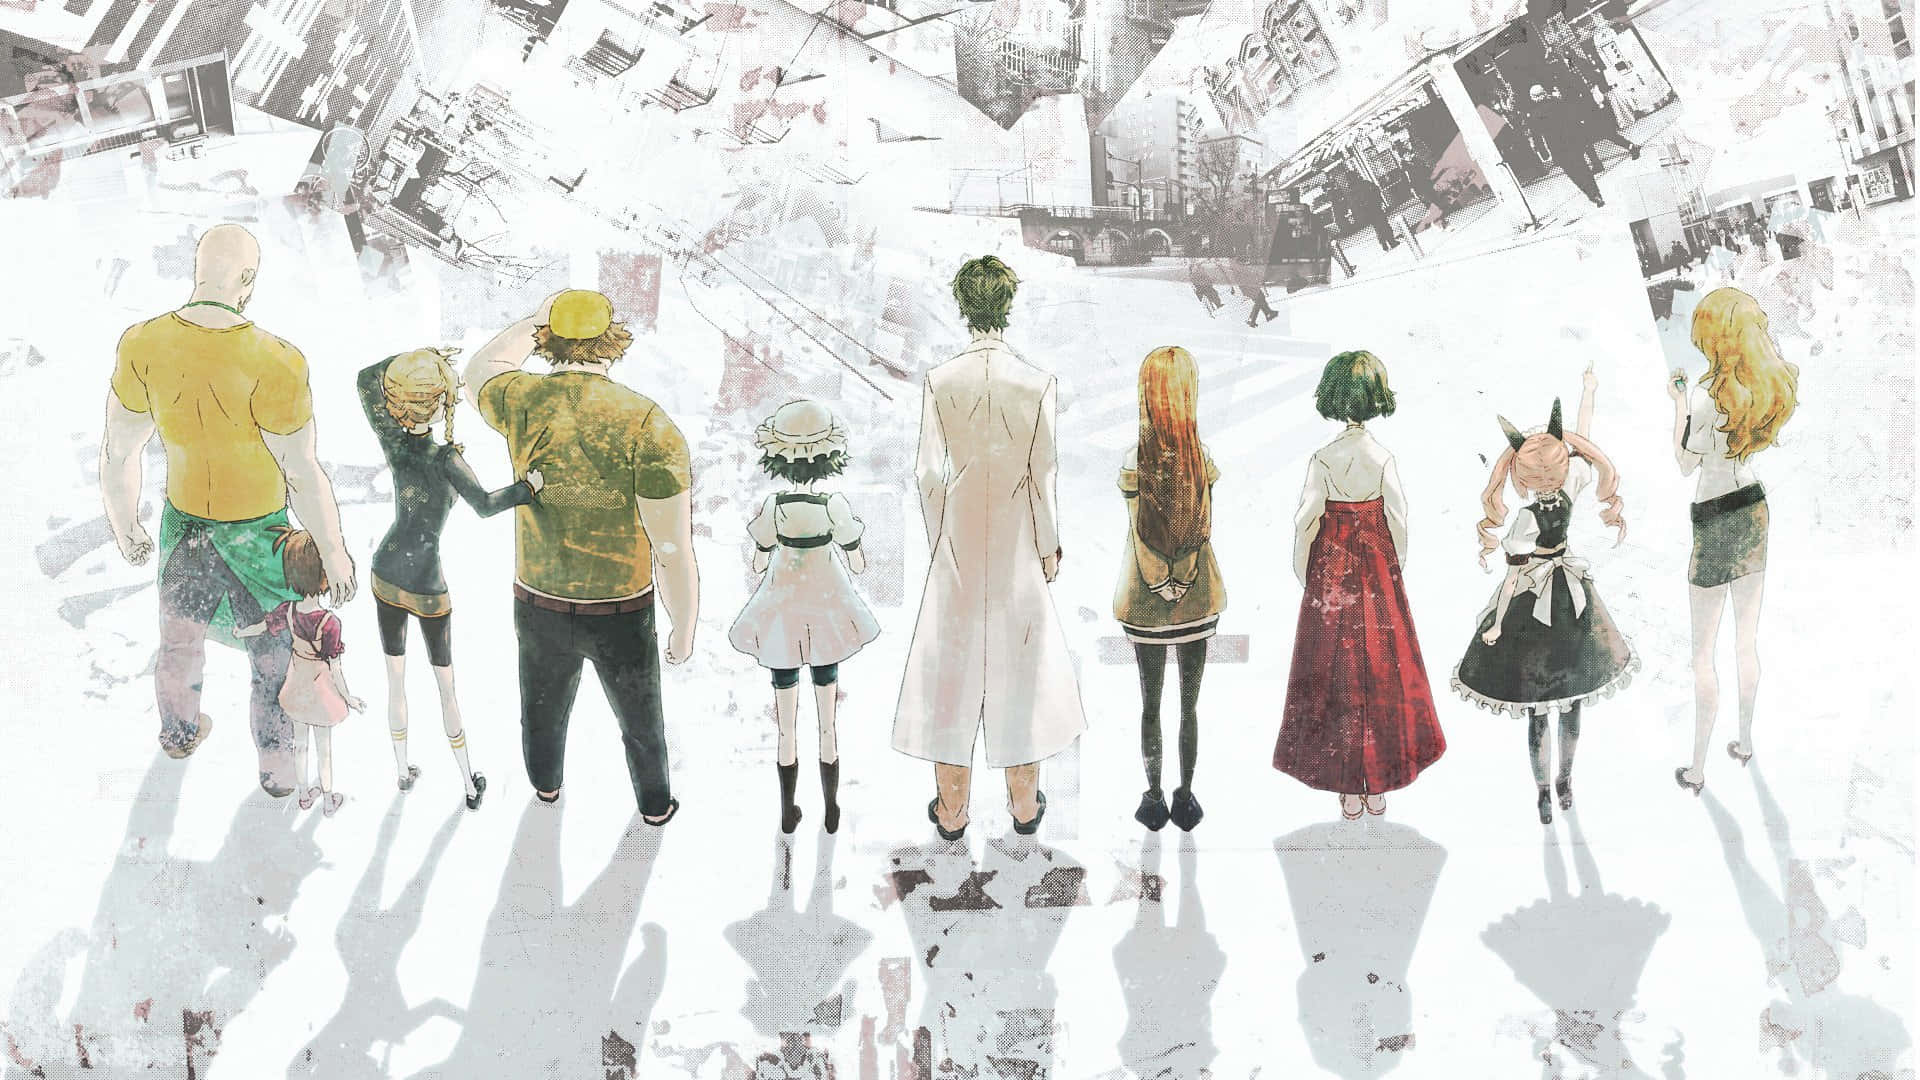 Steins Gate Characters on Rooftop